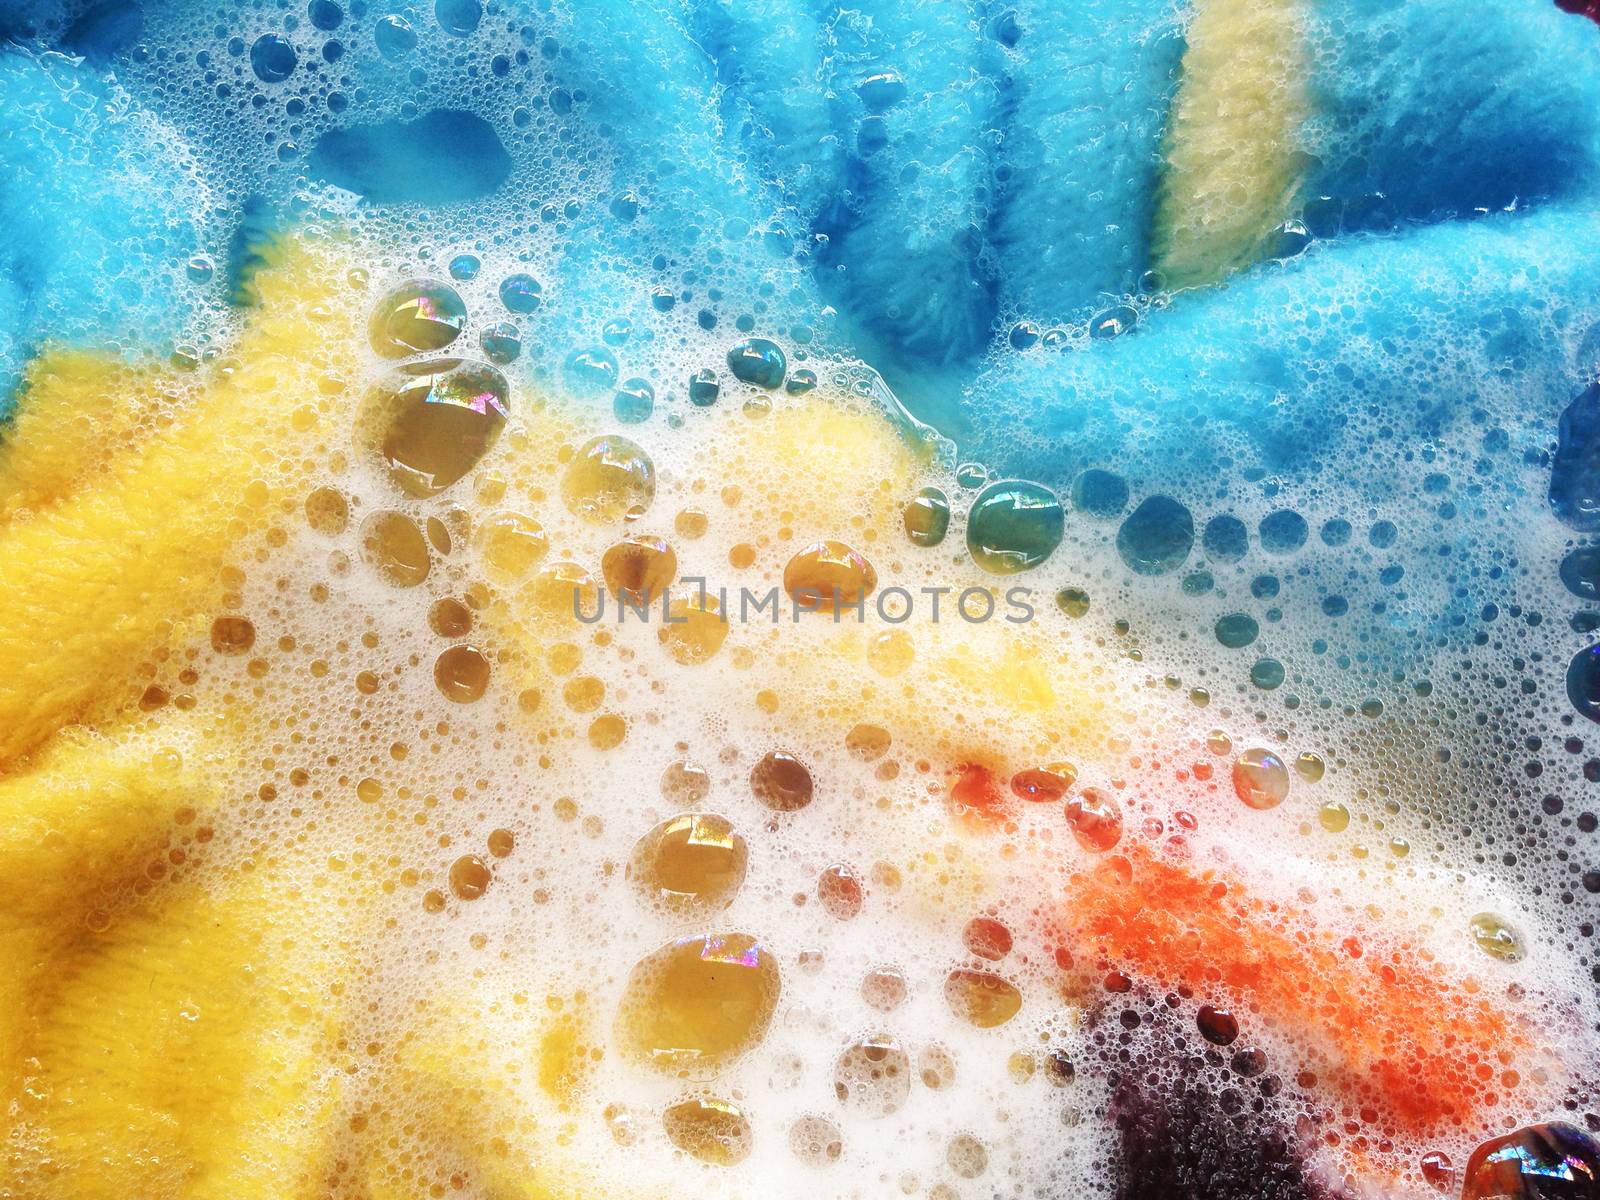 Colorful clean, Soak a cloth before washing